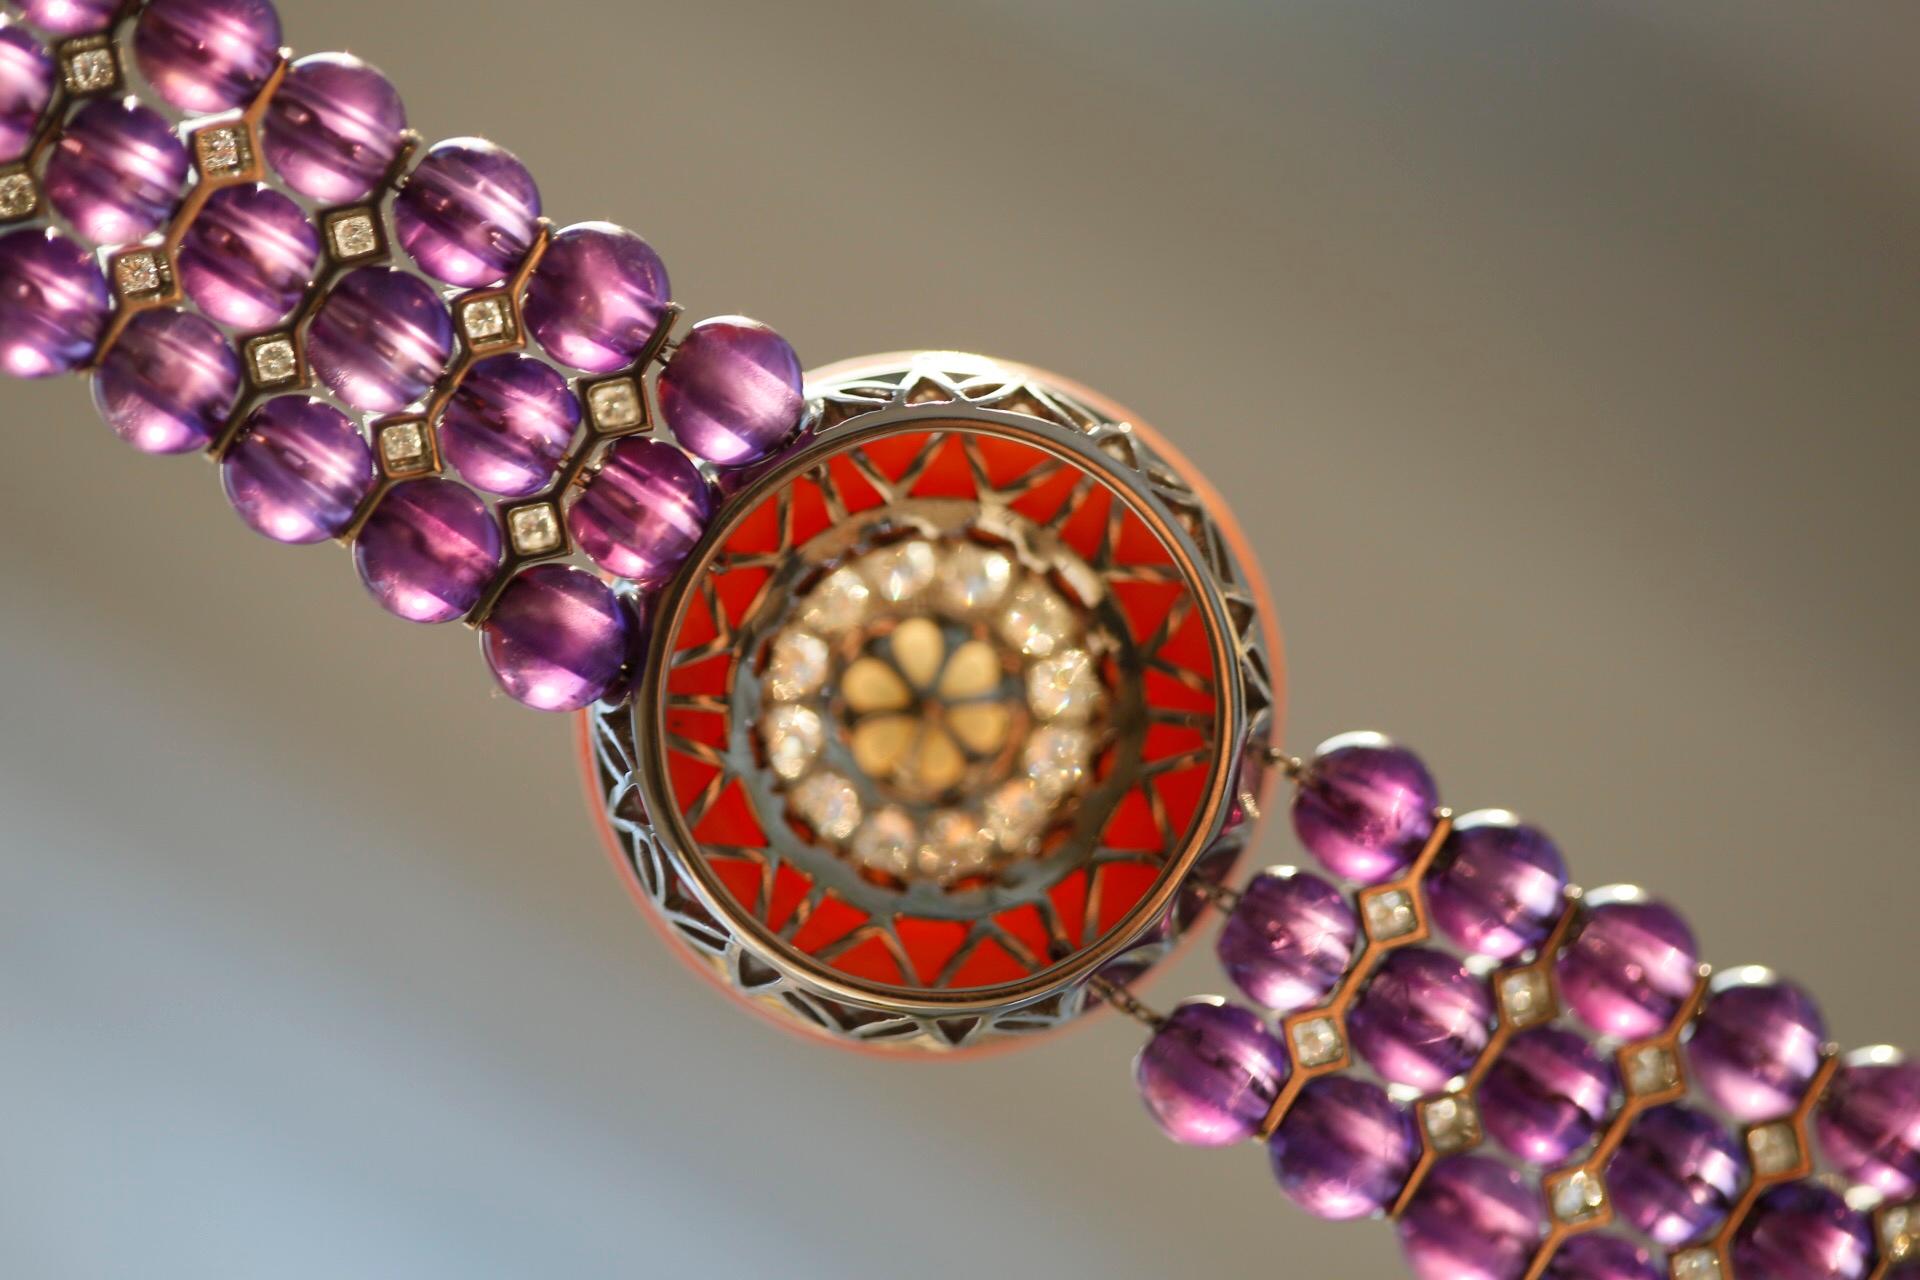 A glorious multi-gem bracelet bursting with colours and tremendous design. 

Beads of amethyst, with expressive colouring of violet tones, embellished with spacers which include two diamonds between every row of three amethyst beads. These help to